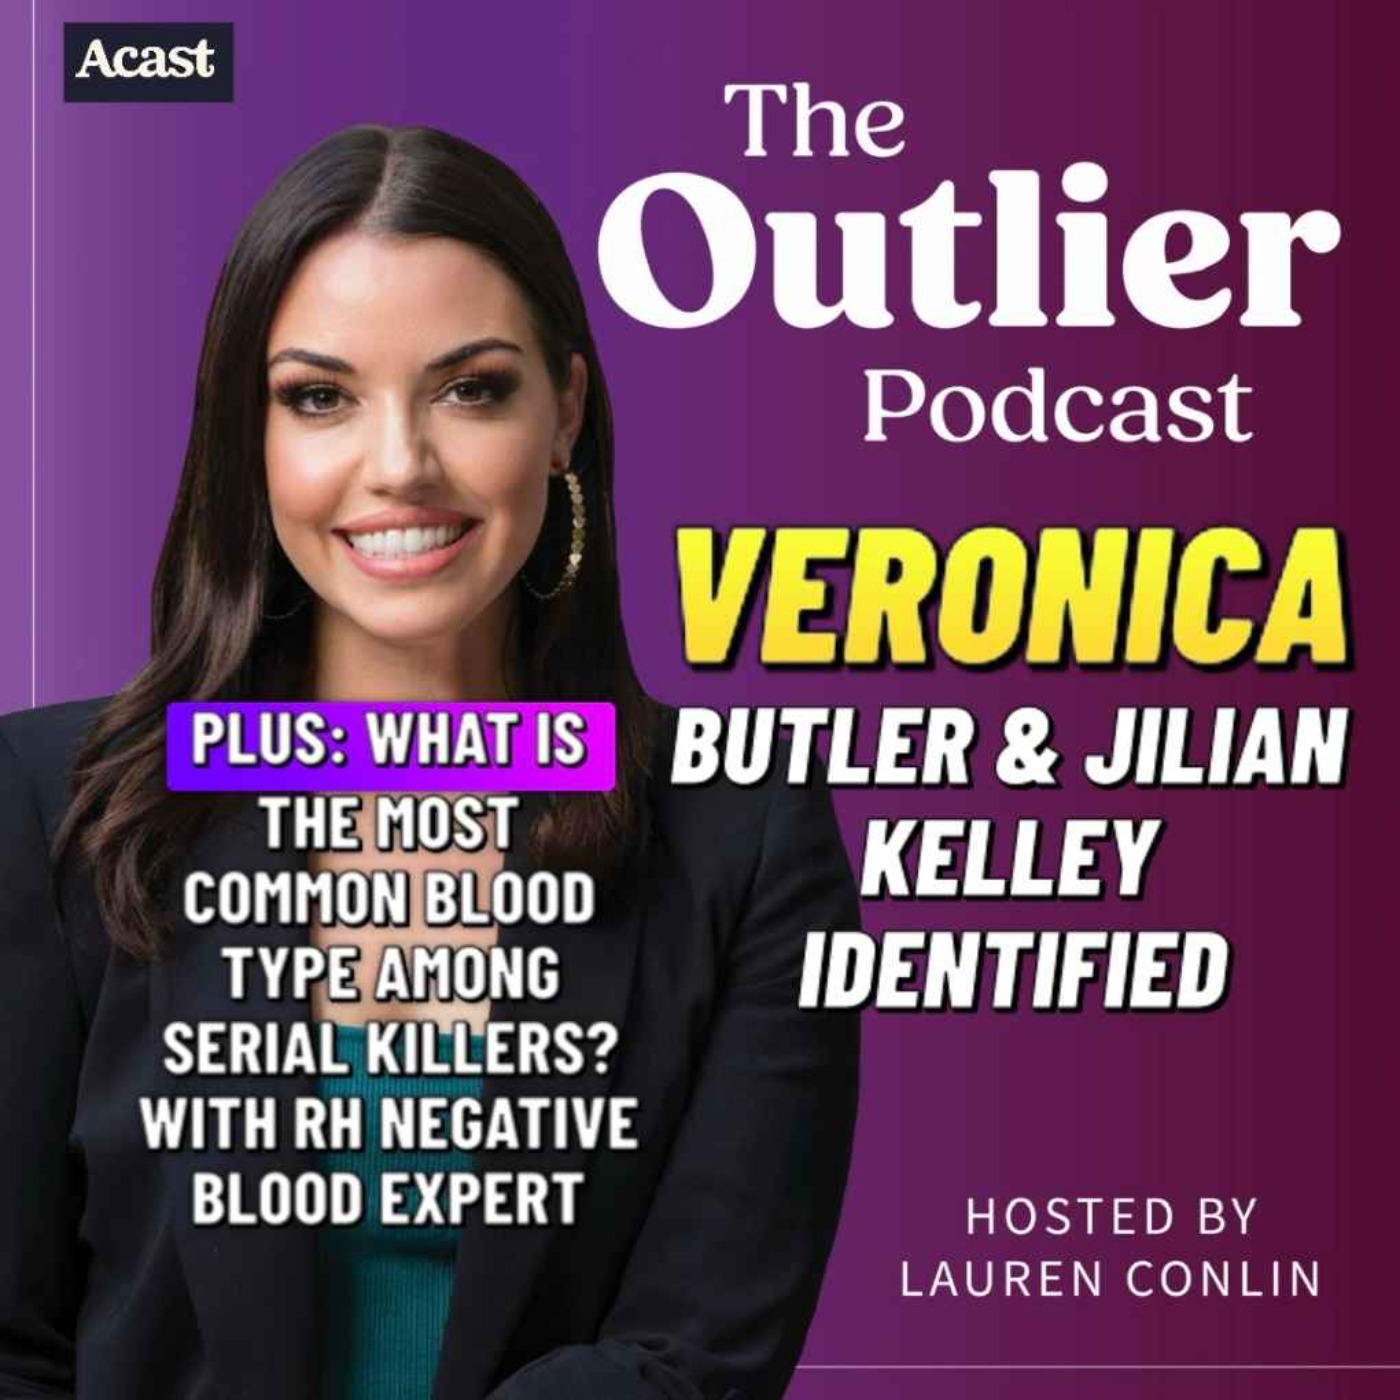 cover art for VERONICA BUTLER & JILIAN KELLEY IDENTIFIED. Plus "GOD'S MISFITS" first court appearance; and a discussion with MICHAEL DAMMANN, RH Negative Blood Type Expert